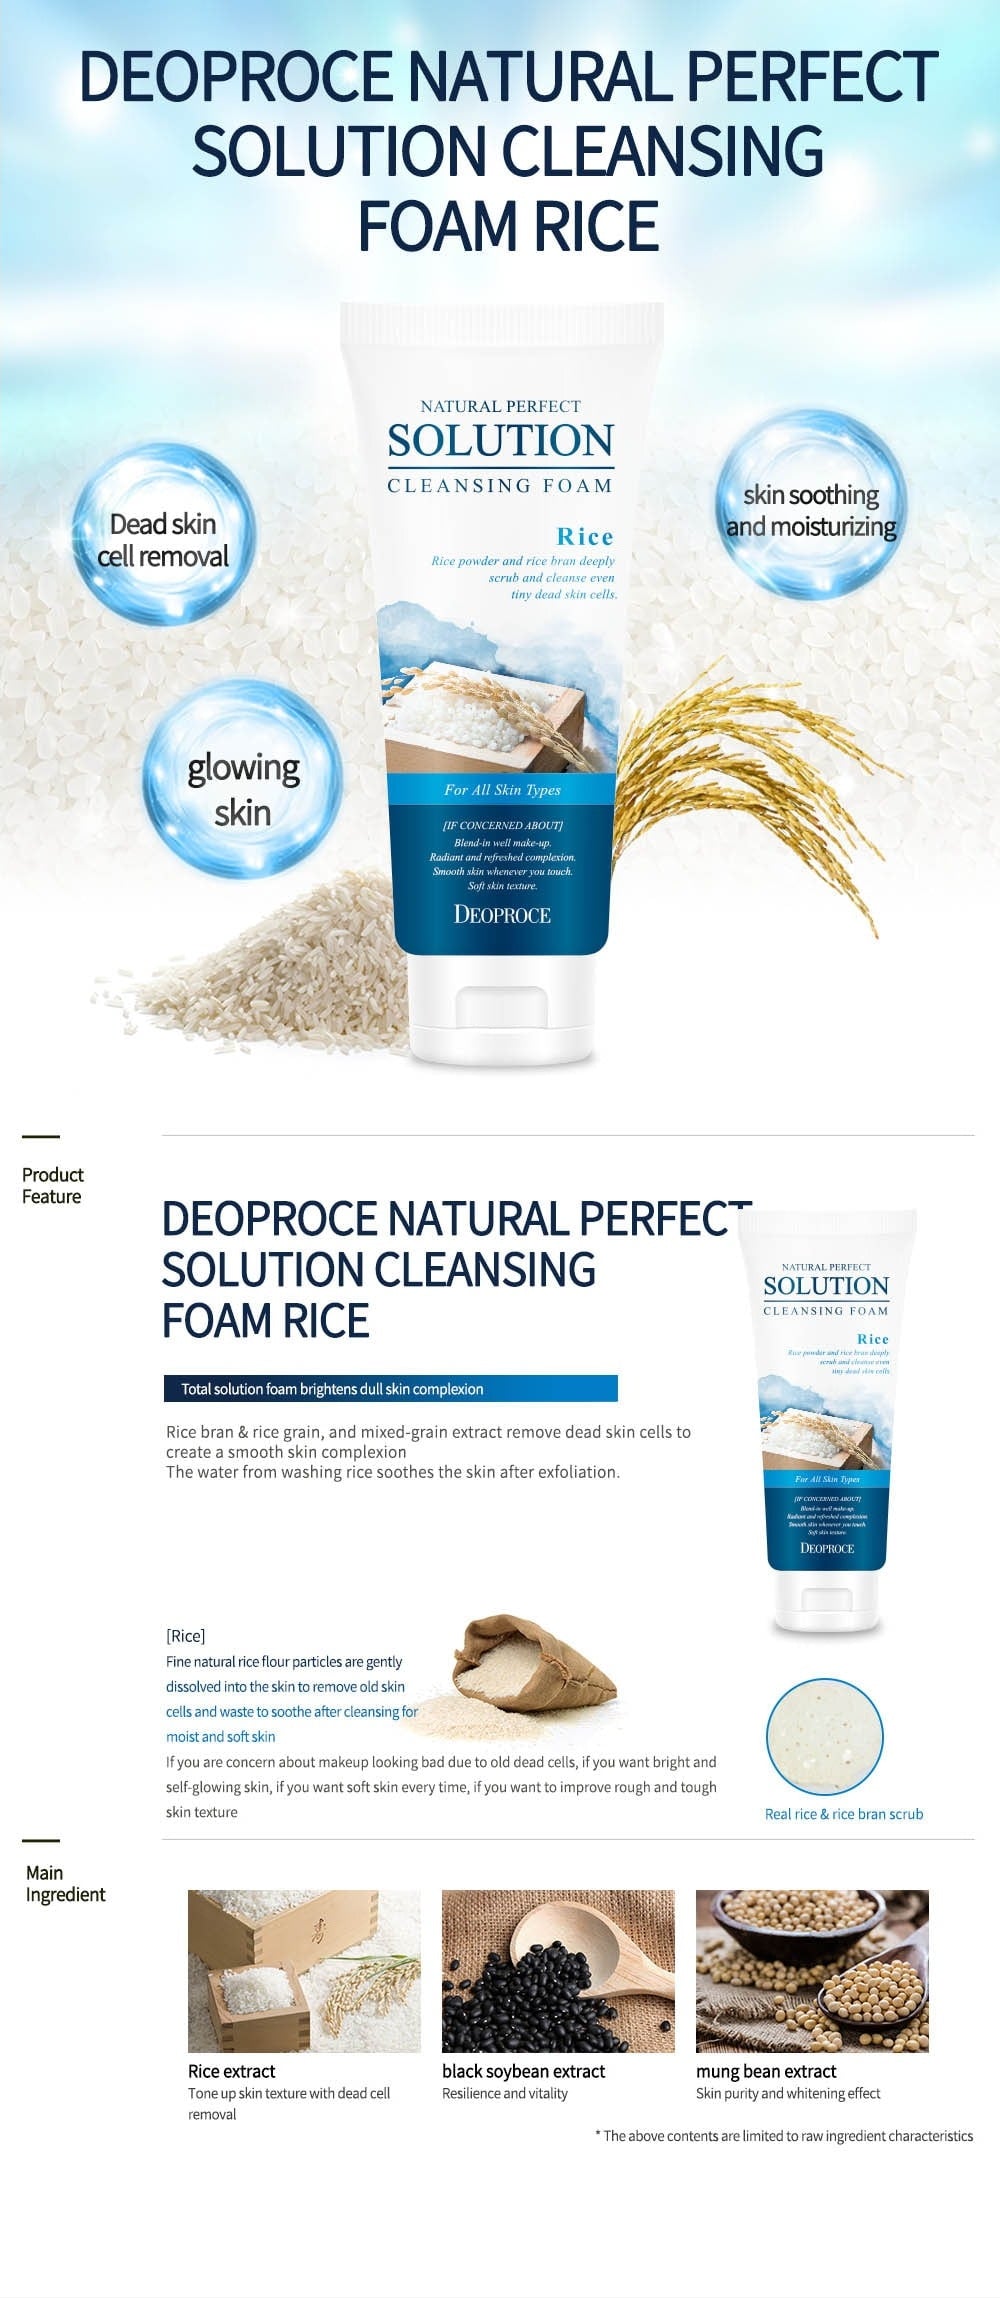 Deoproce Natural Perfect Solution Cleansing Foam Rice 170g